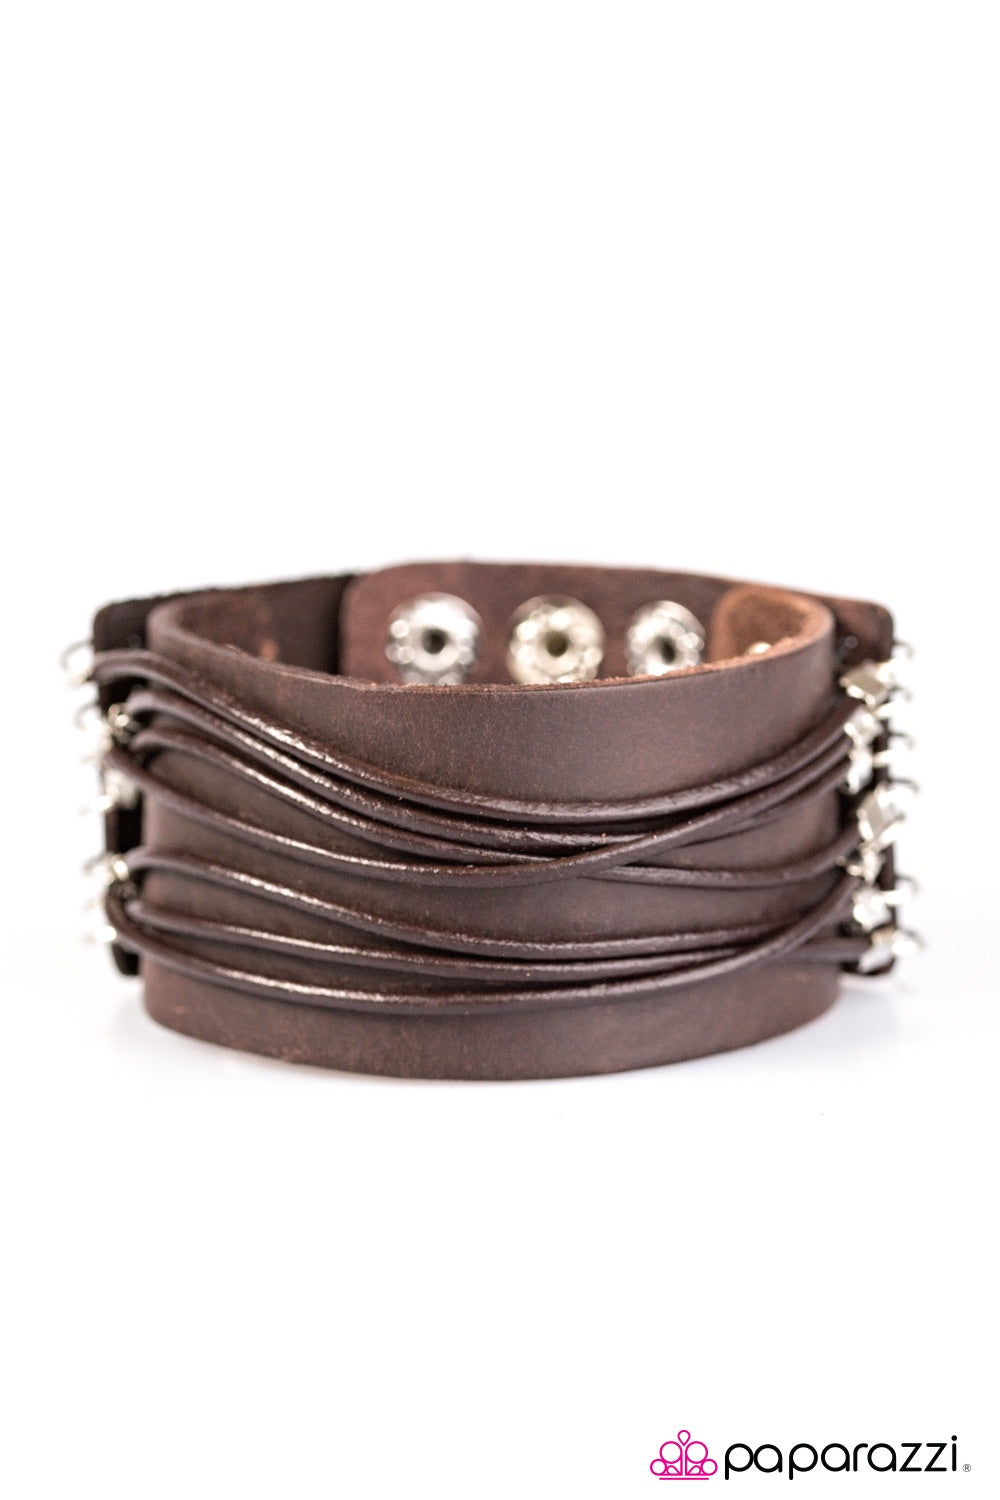 Paparazzi Every Man For Himself Leather Men's Bracelet-Brown